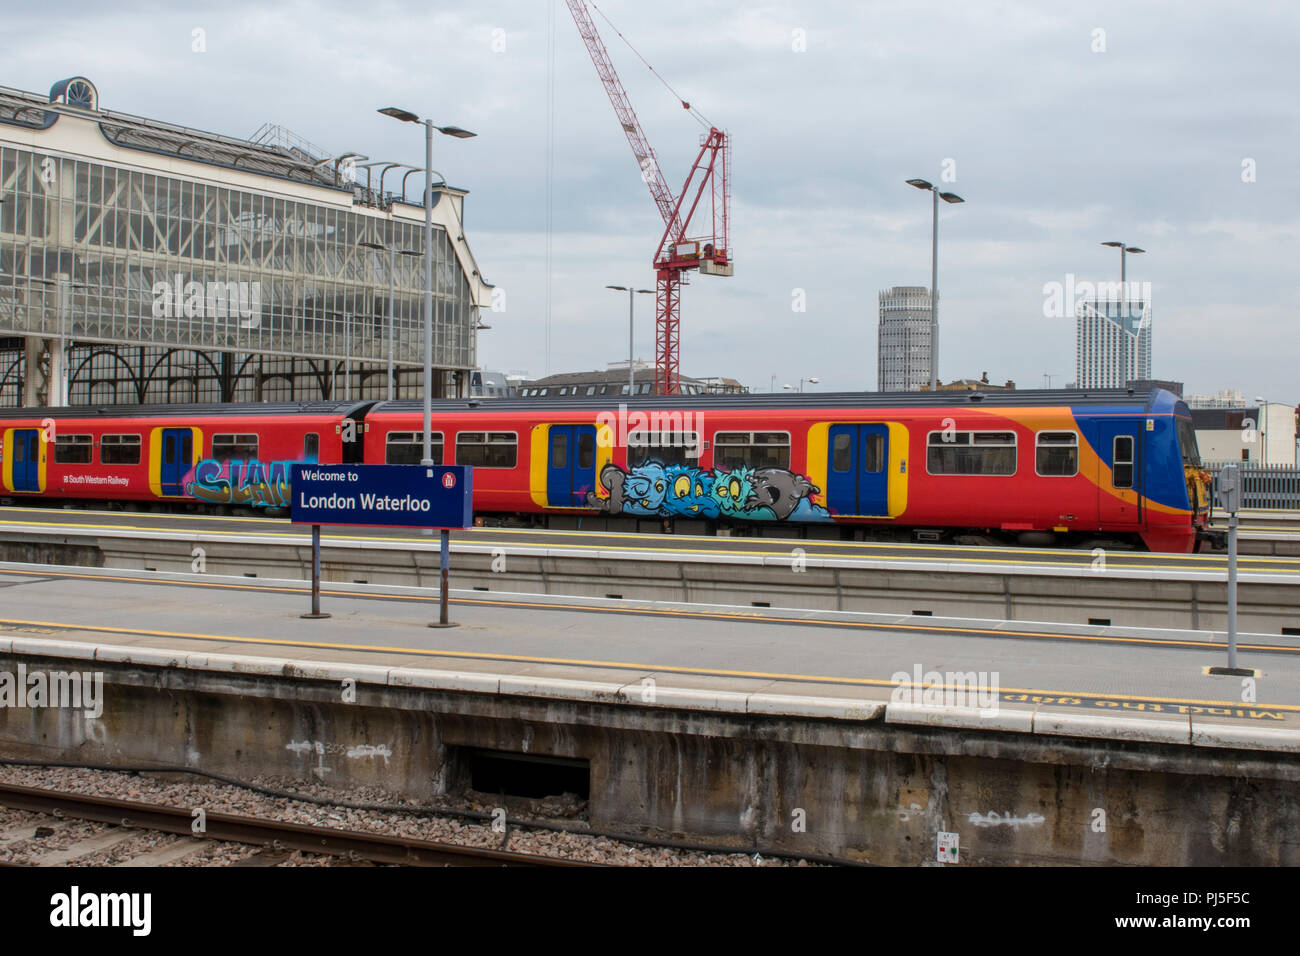 graffiti on the side of a southwestern railway train in the platform at London waterloo railway station in central london Stock Photo